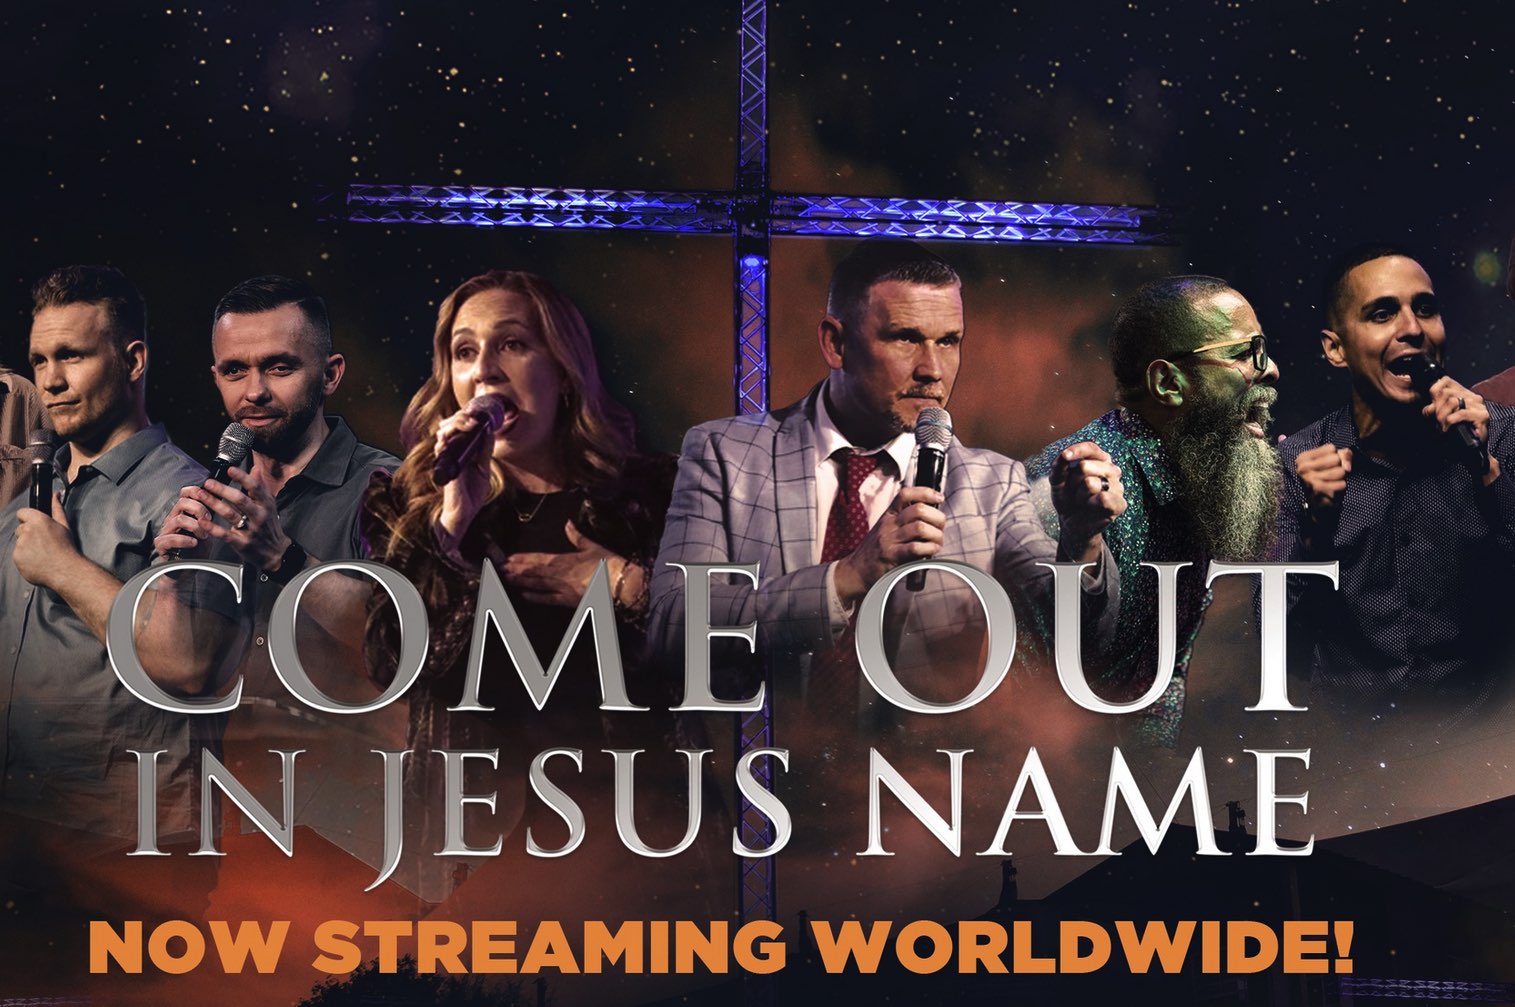 Come Out In Jesus Name film now streaming worldwide